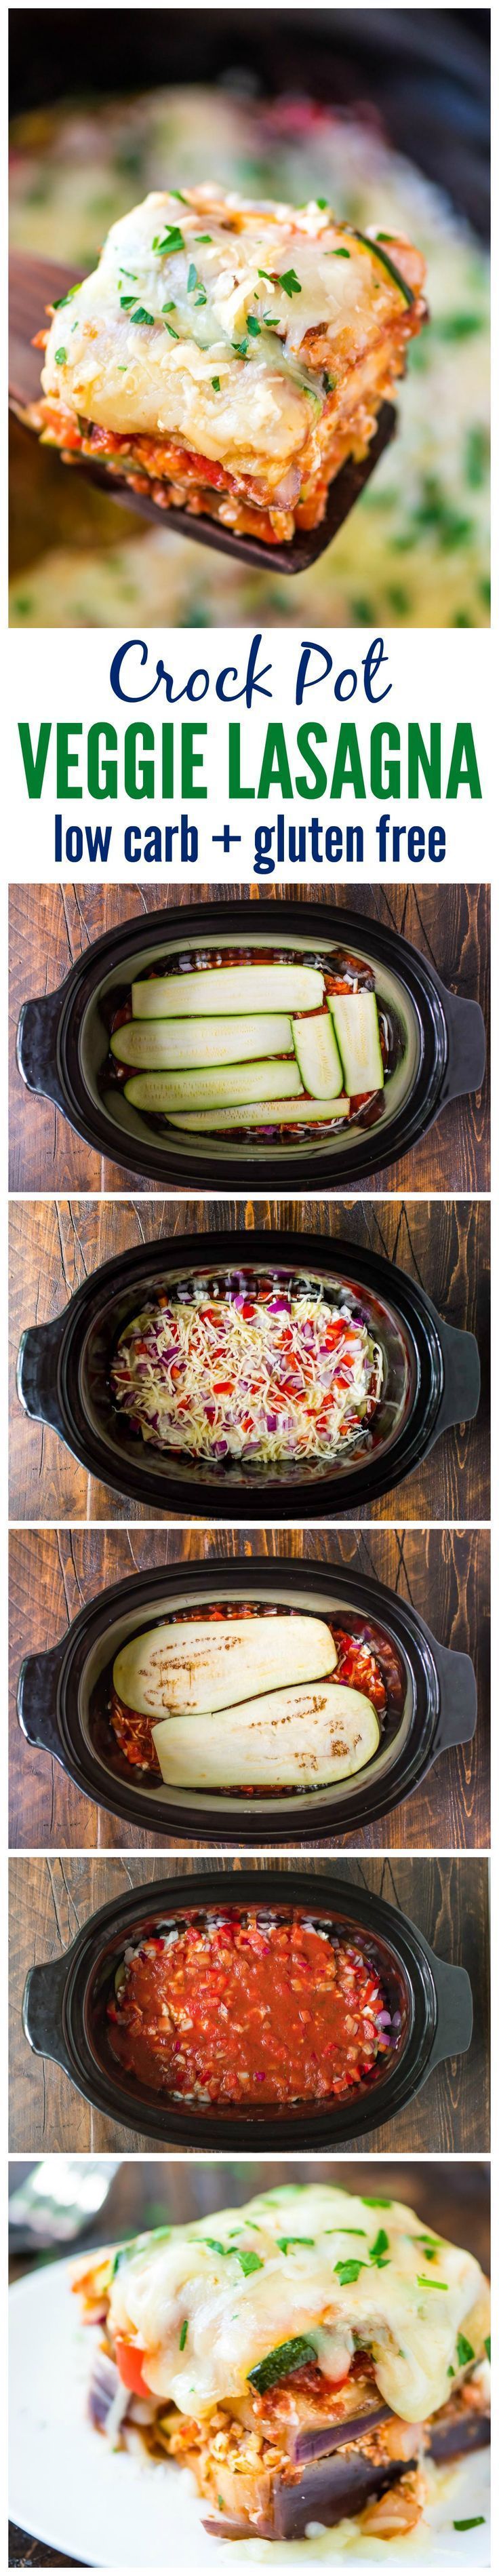 Delicious Crock Pot Low Carb Lasagna made with zucchini and eggplant instead of pasta — Less than 275 calories for a HUGE,